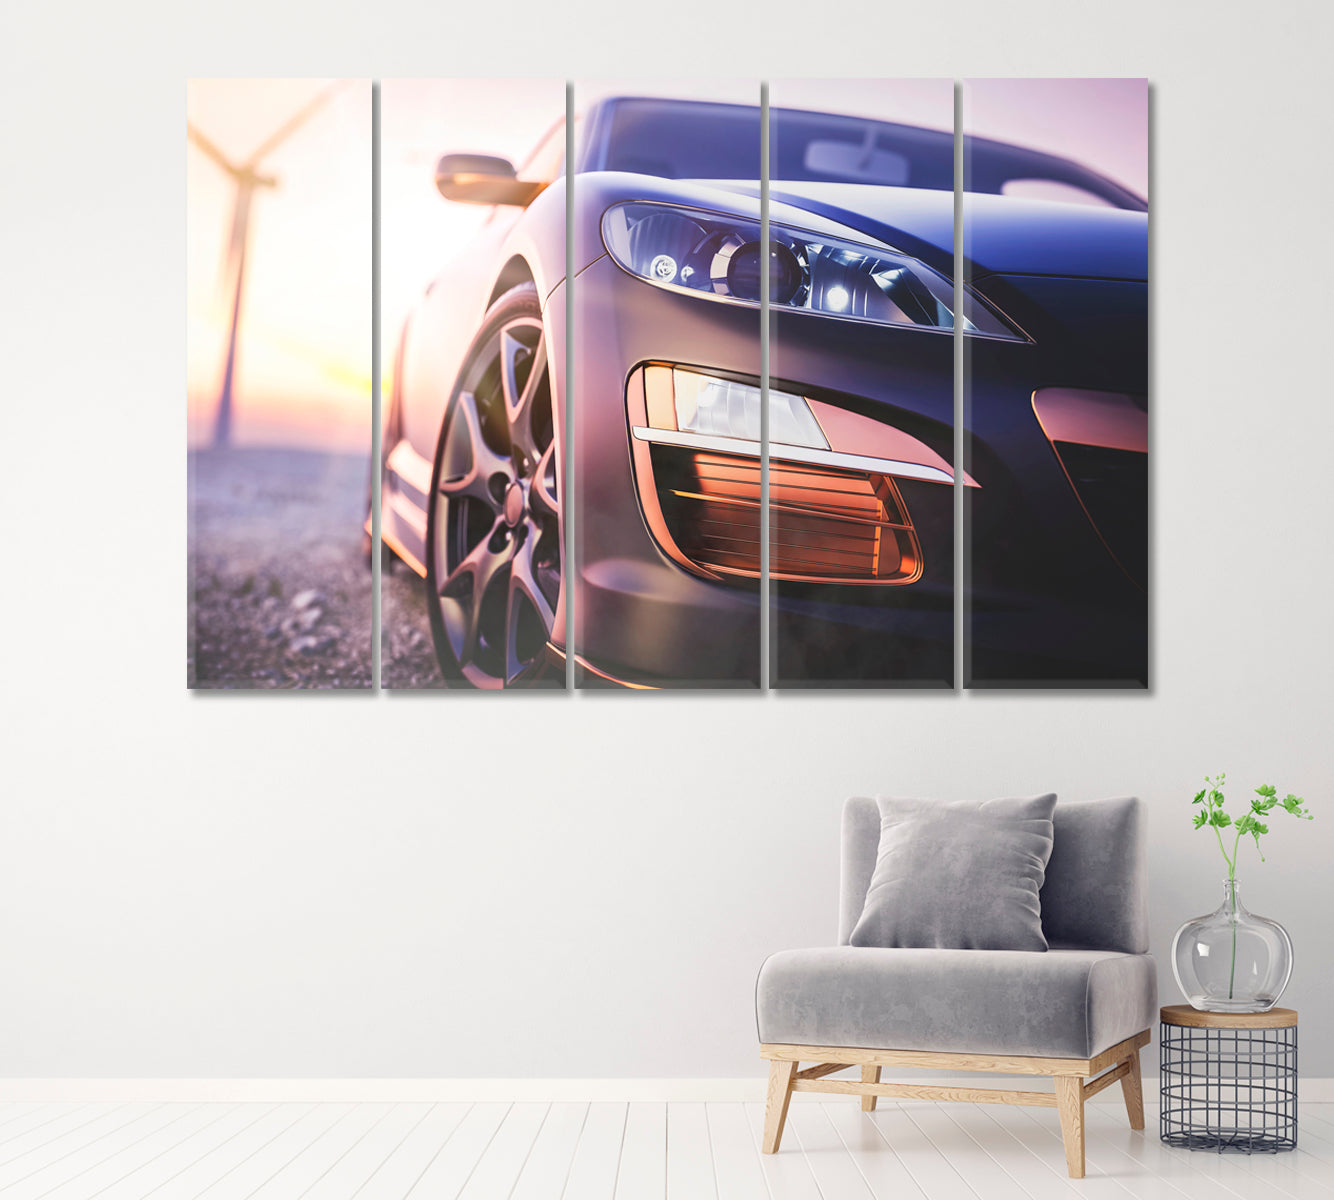 Sports Car and Wind Turbine Canvas Print ArtLexy 5 Panels 36"x24" inches 